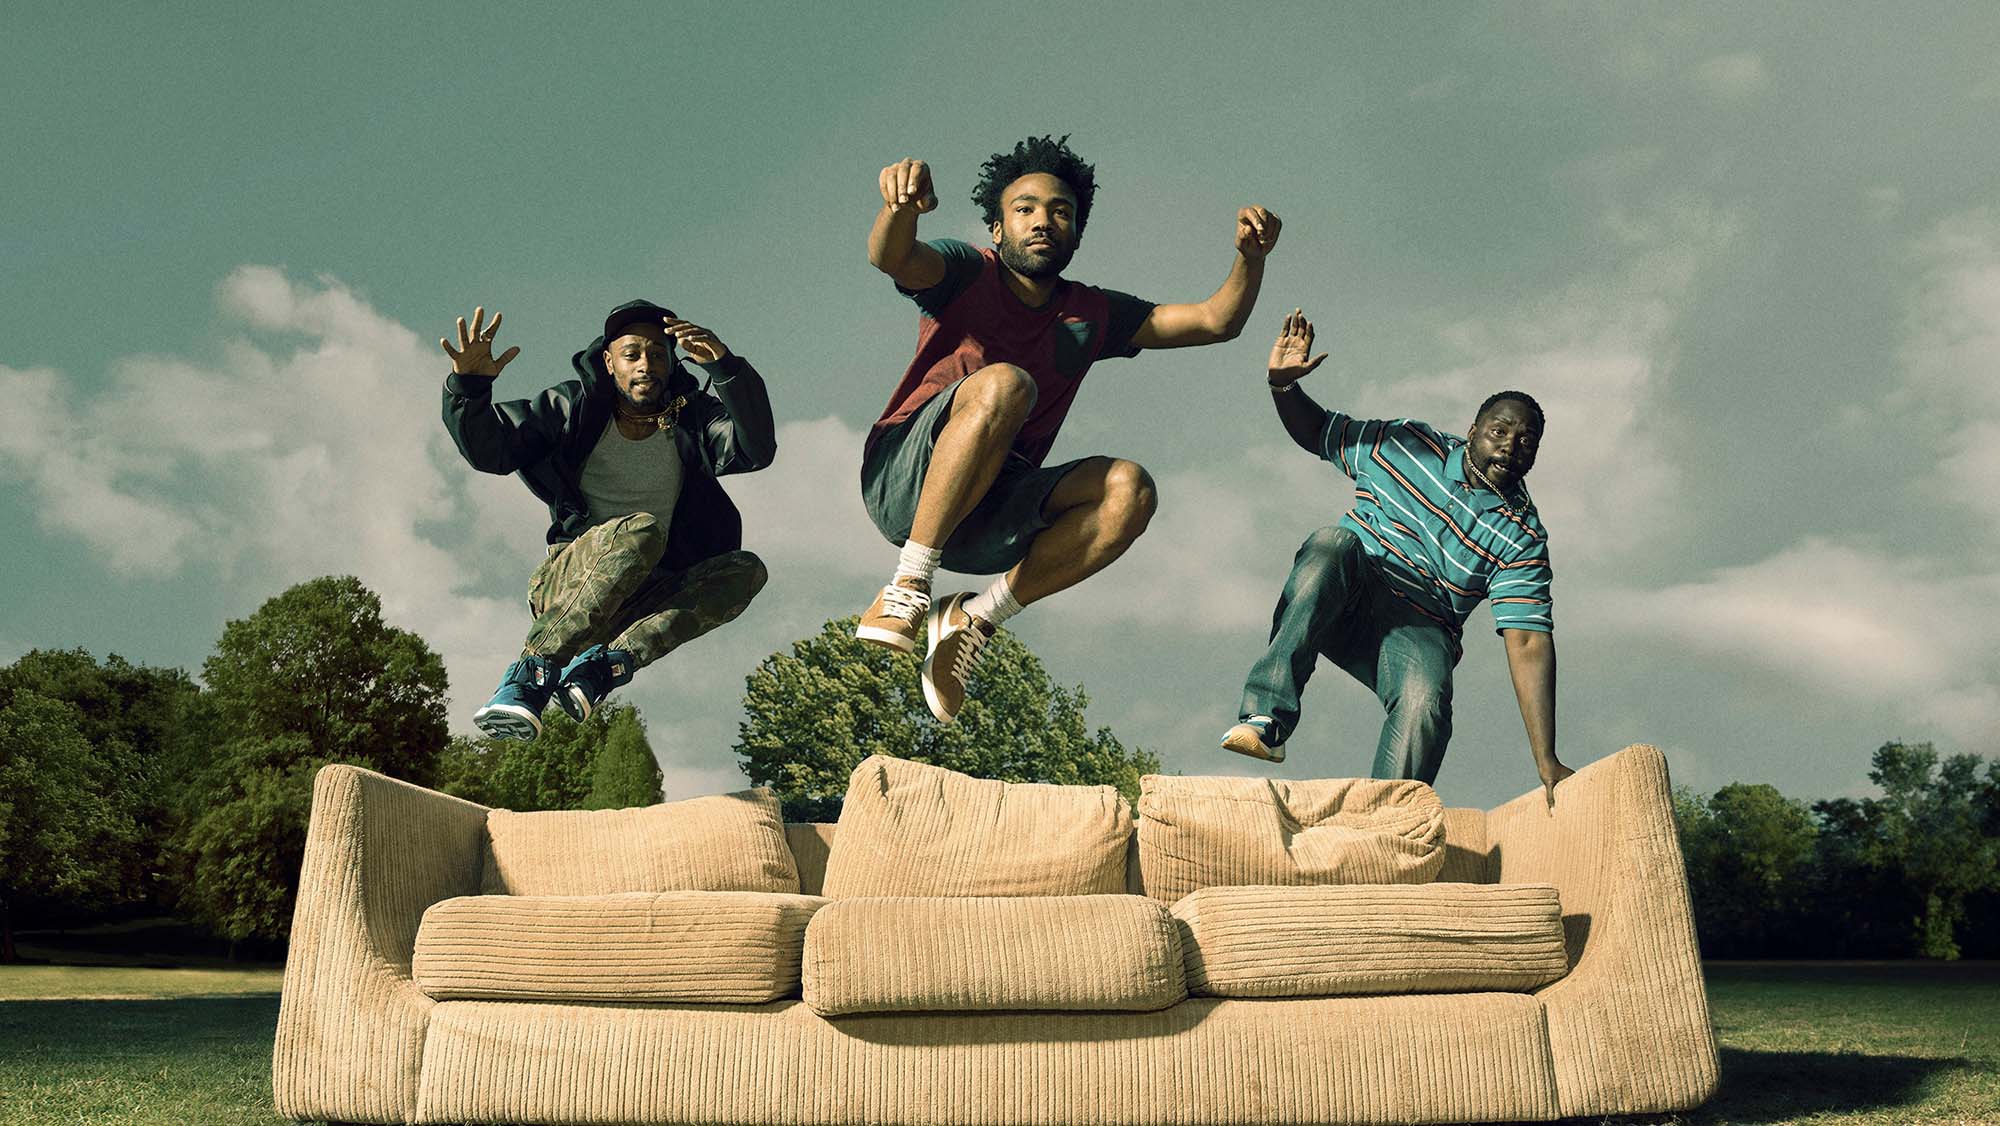 There are too many reasons why 'Atlanta' is the most groundbreaking series on TV, but we’ve whittled them down to a mere seven. Let’s dive in.